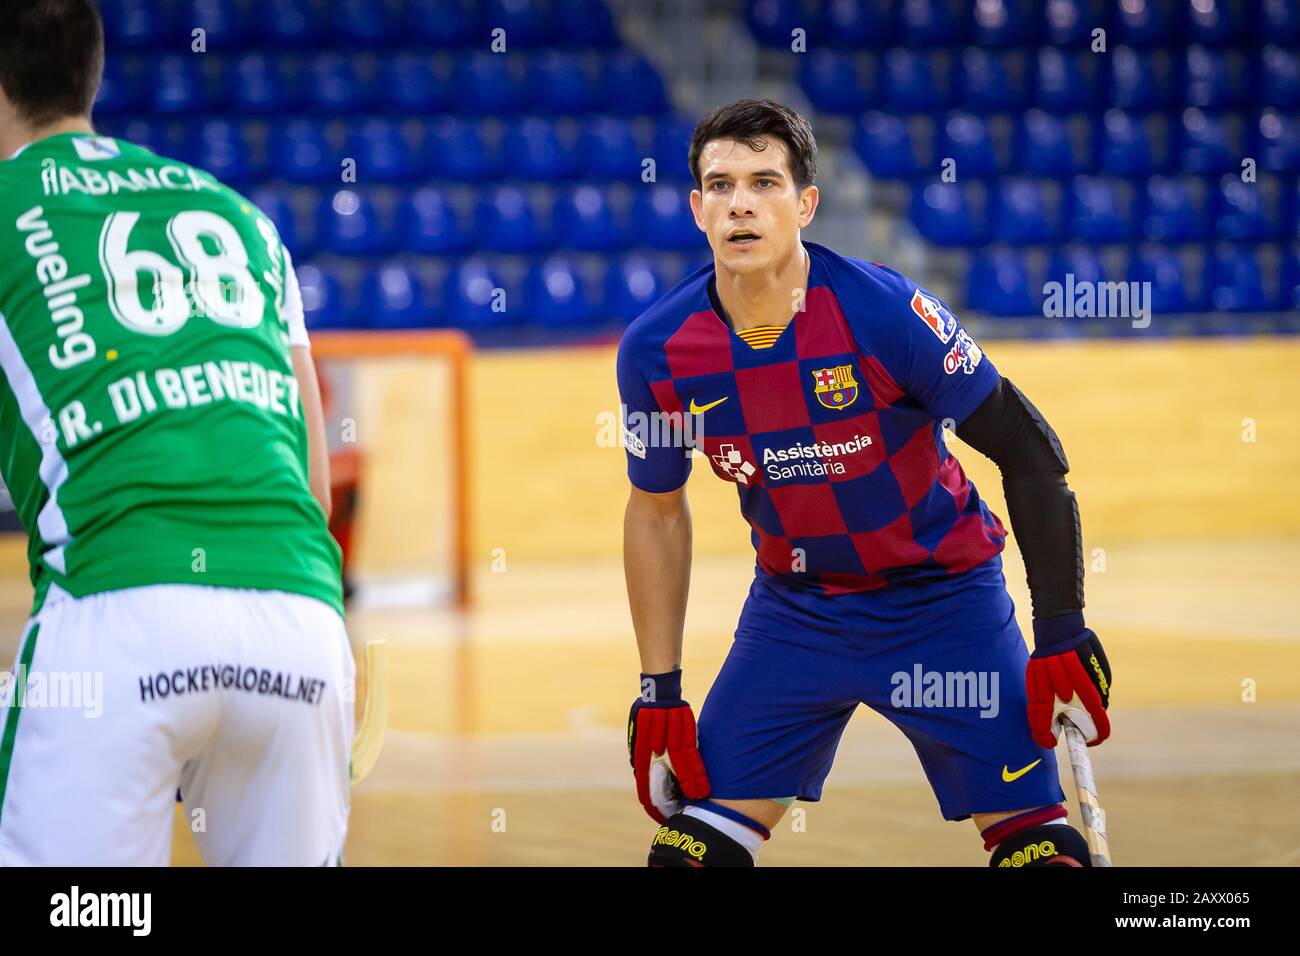 BARCELONA, SPAIN - FEBRUARY 11, 2020. Spanish OK League match between FCB  and Deportivo Liceo. Pablo Federico ALVAREZ VERA in action during the match  Stock Photo - Alamy